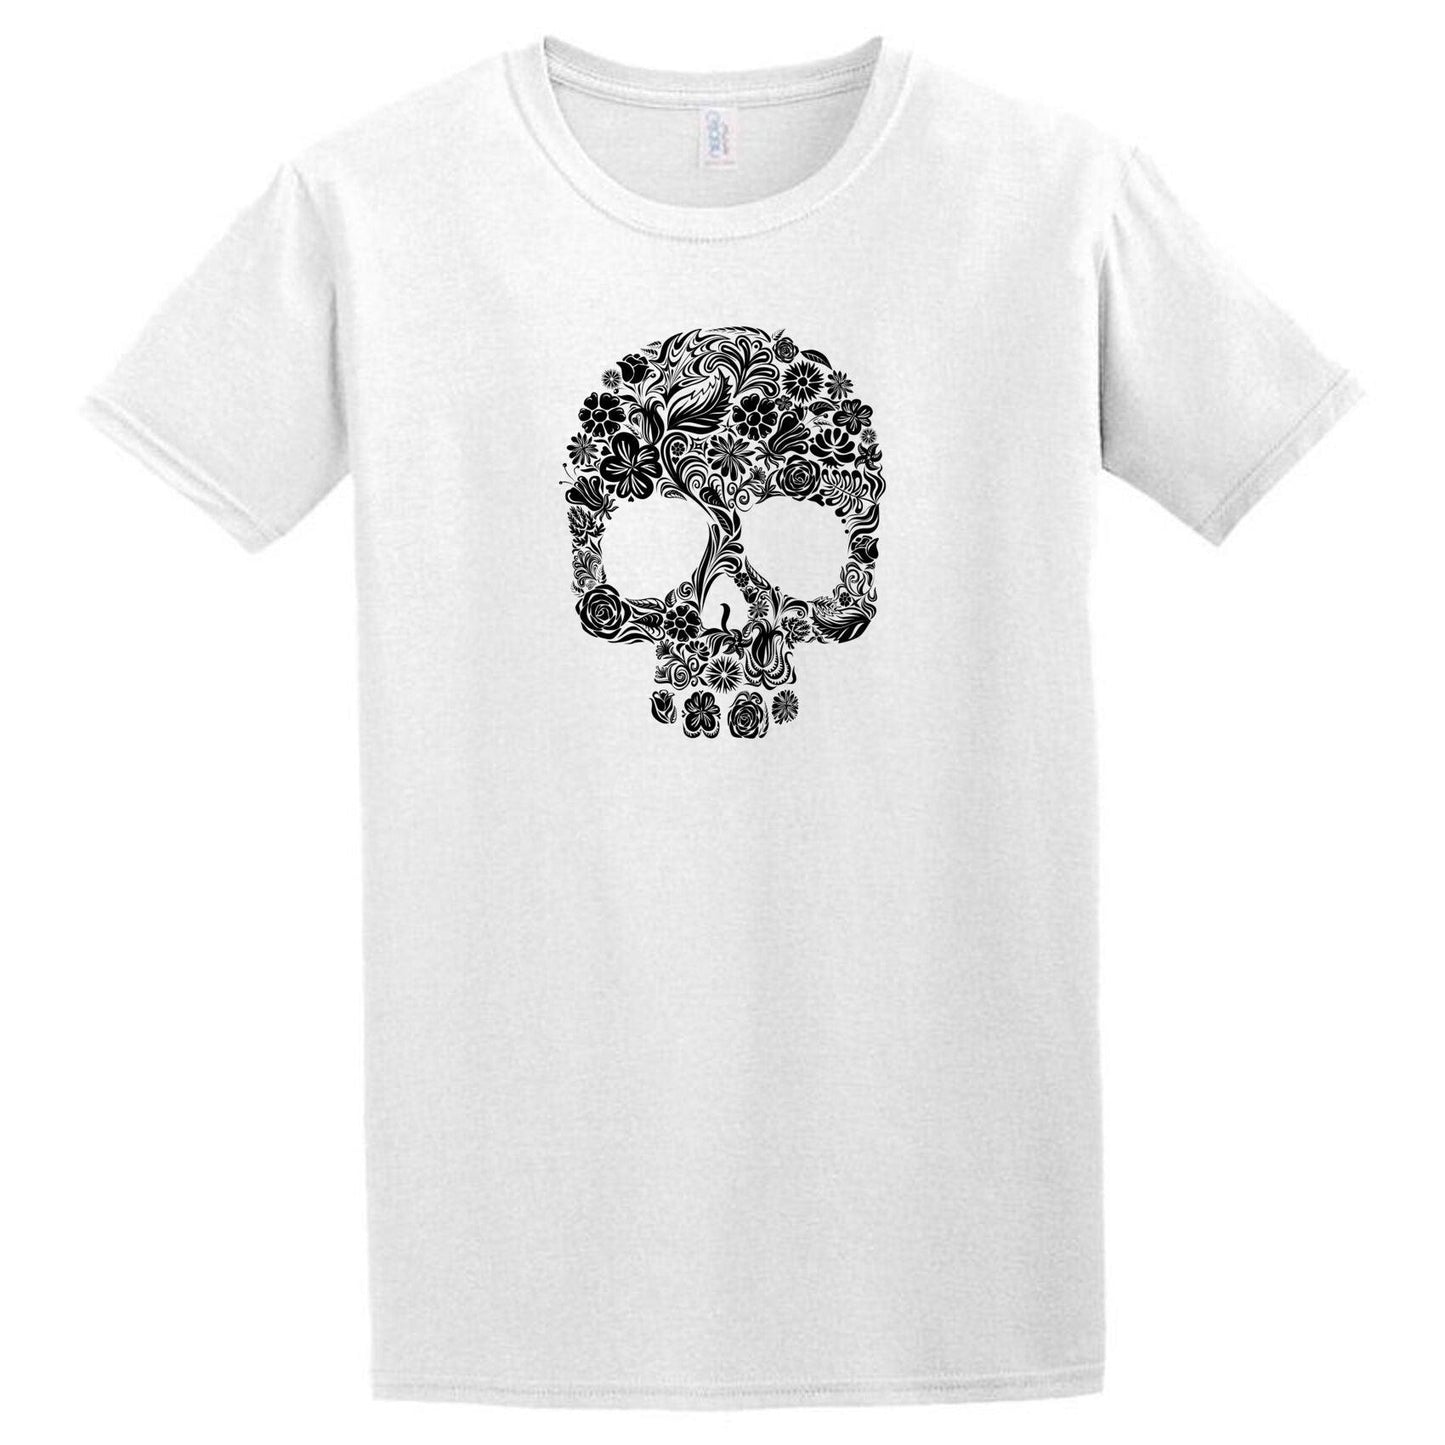 A Twisted Gifts Skull T-Shirt.